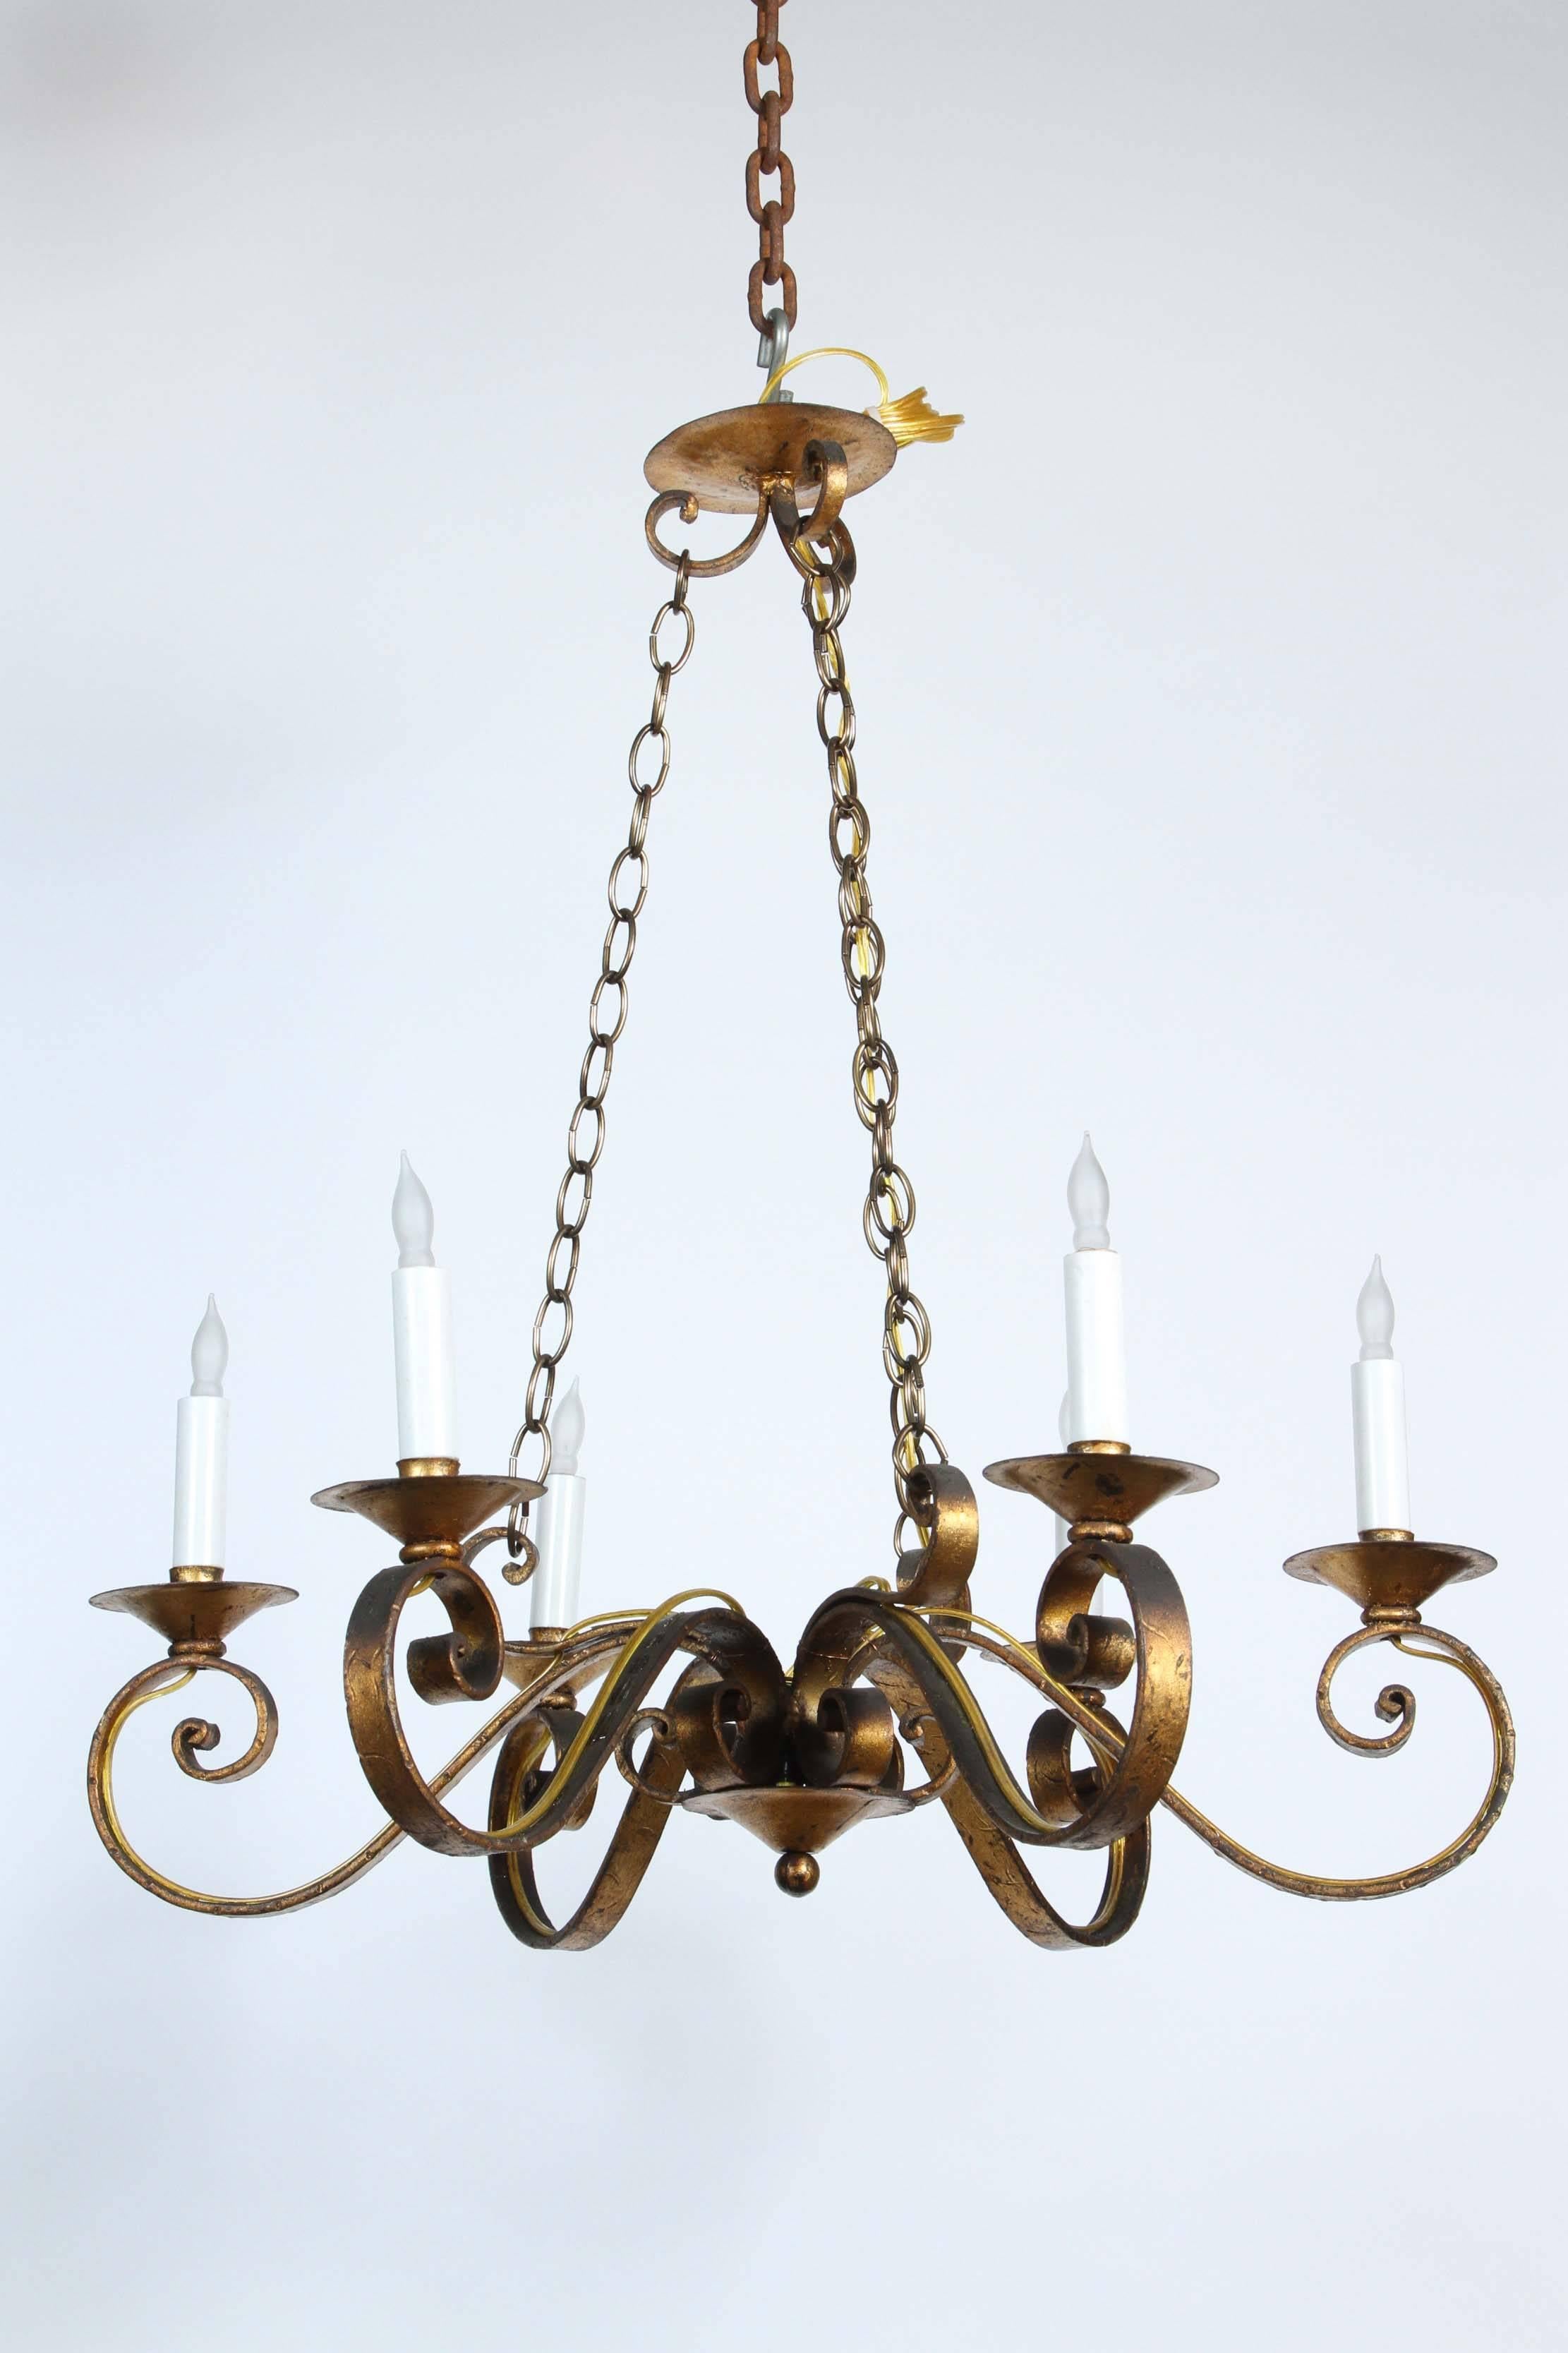 1970s six-arm golden wrought iron chandelier with canopy and chain. This chandelier has been re-wired. This can be seen at our 1800 South Grand Ave location in Downtown Los Angeles.